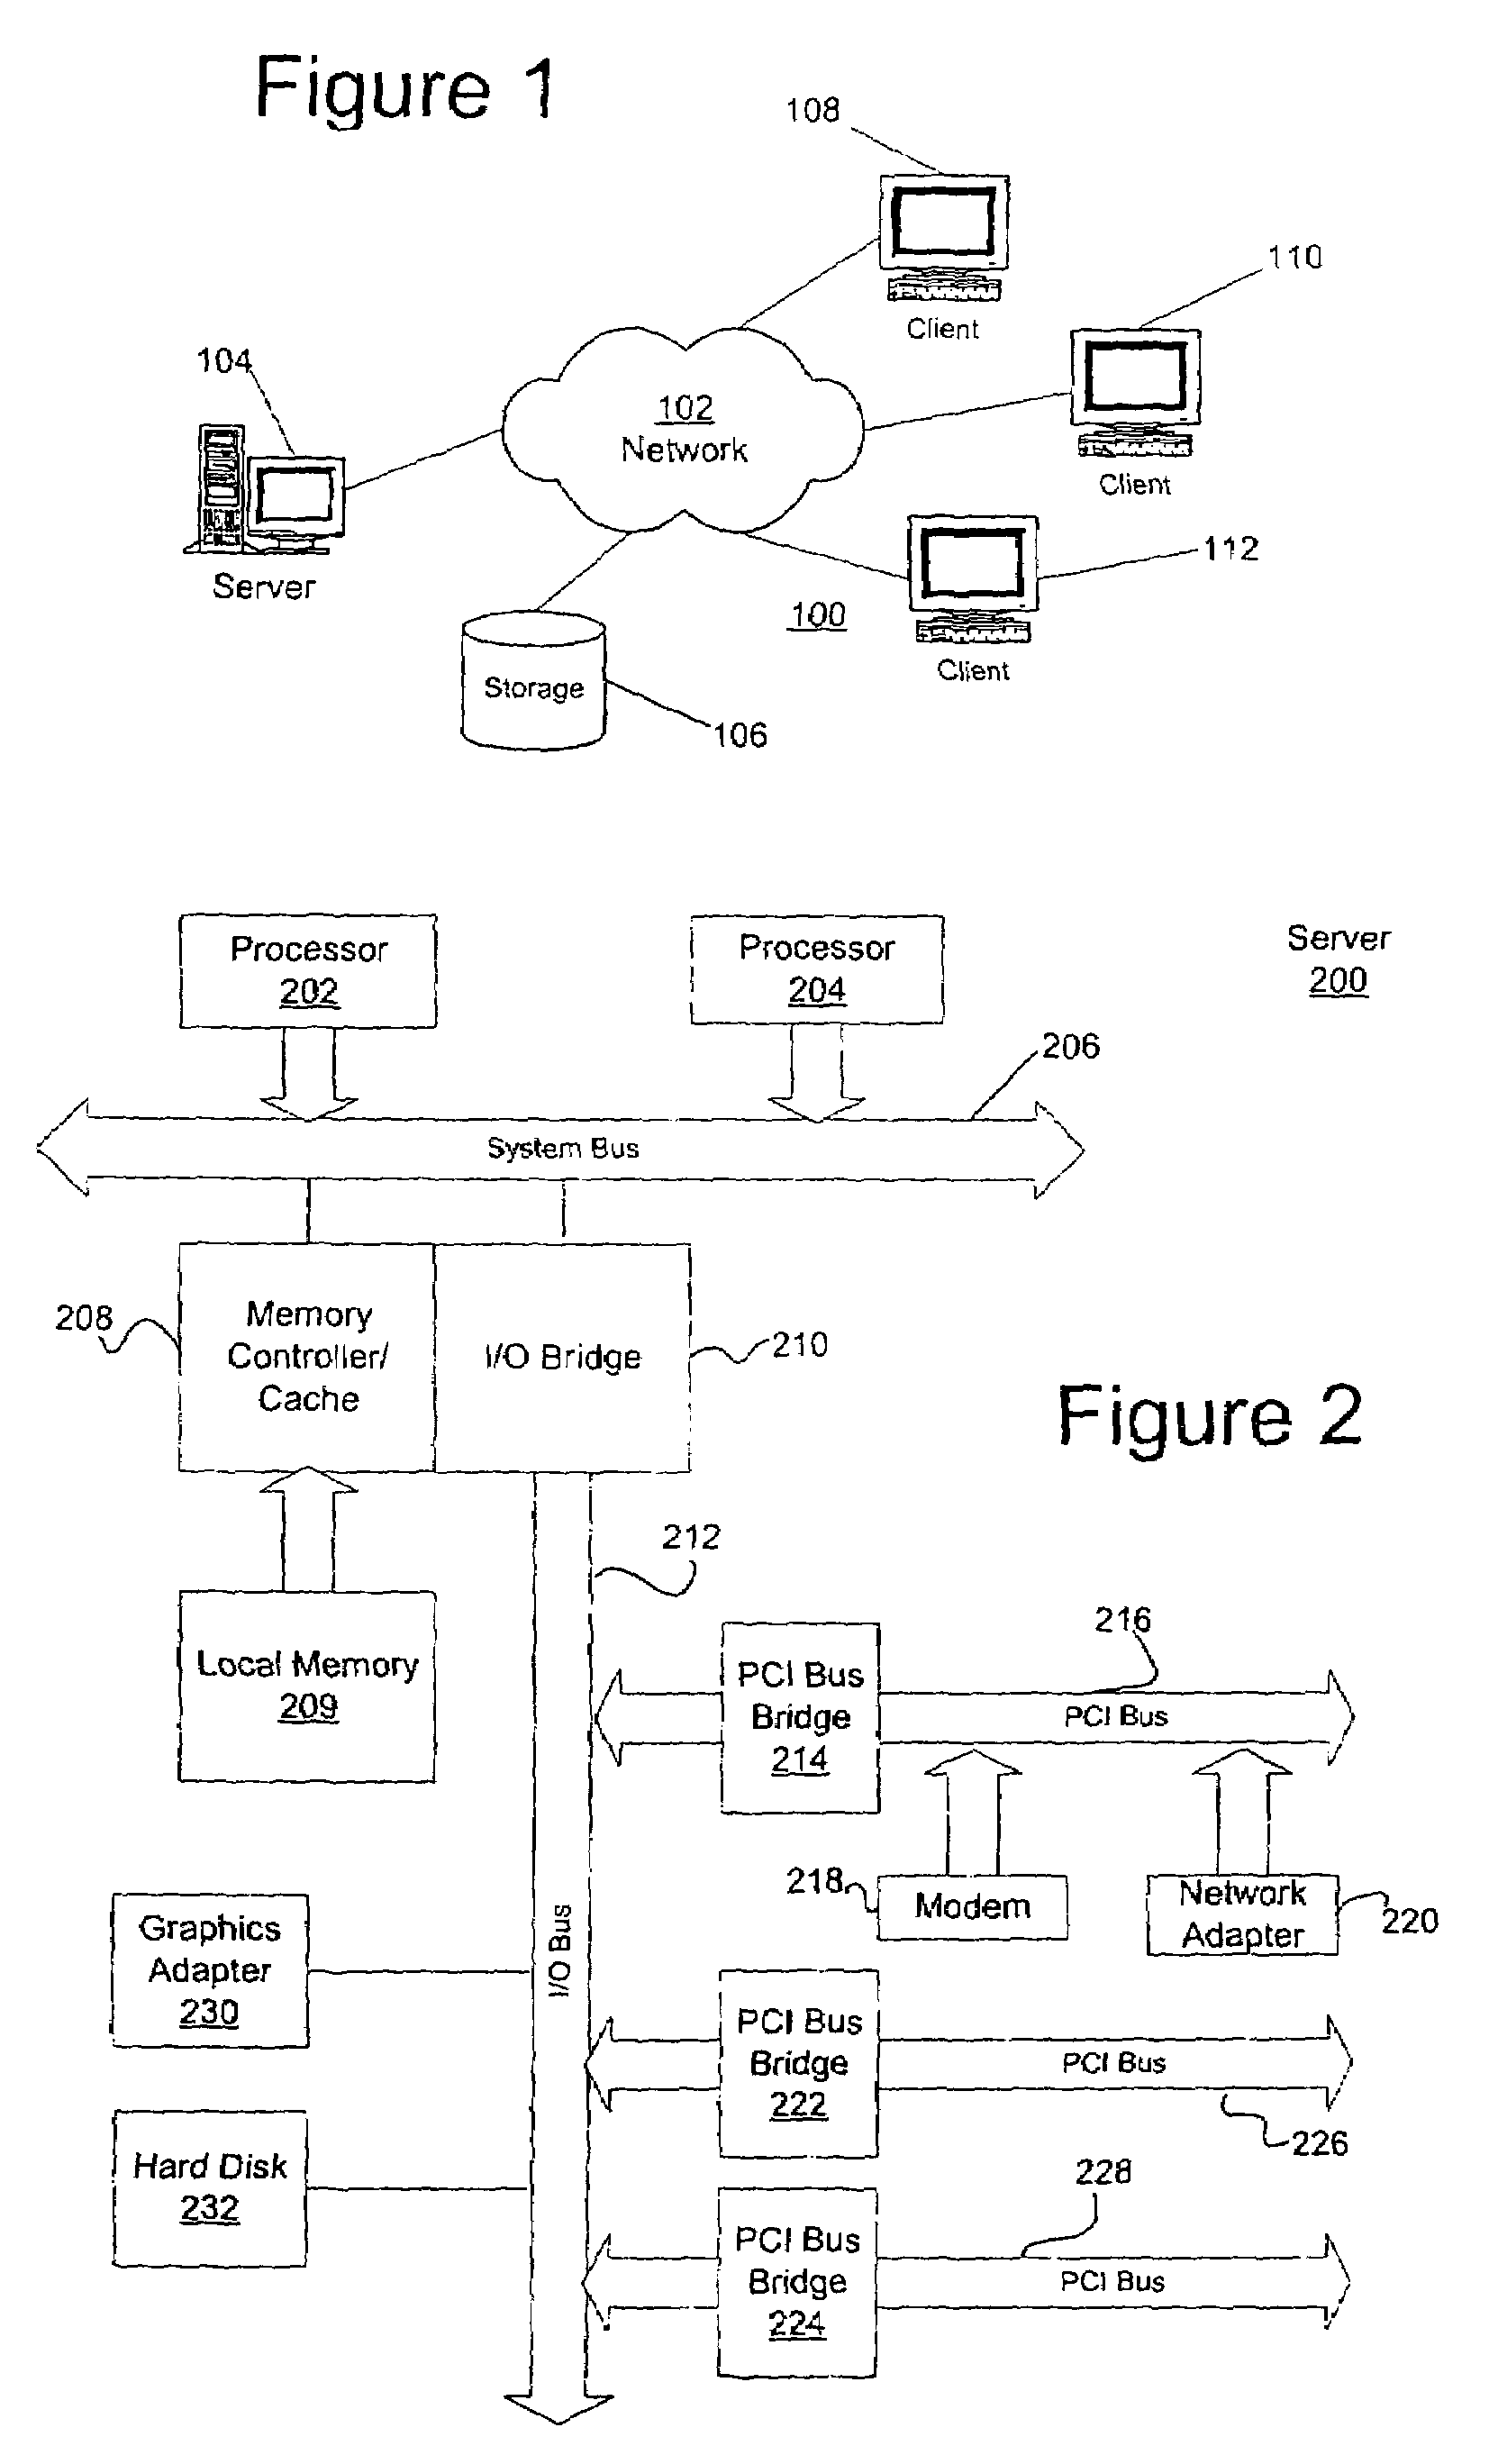 Method and apparatus for automatic modeling building using inference for IT systems